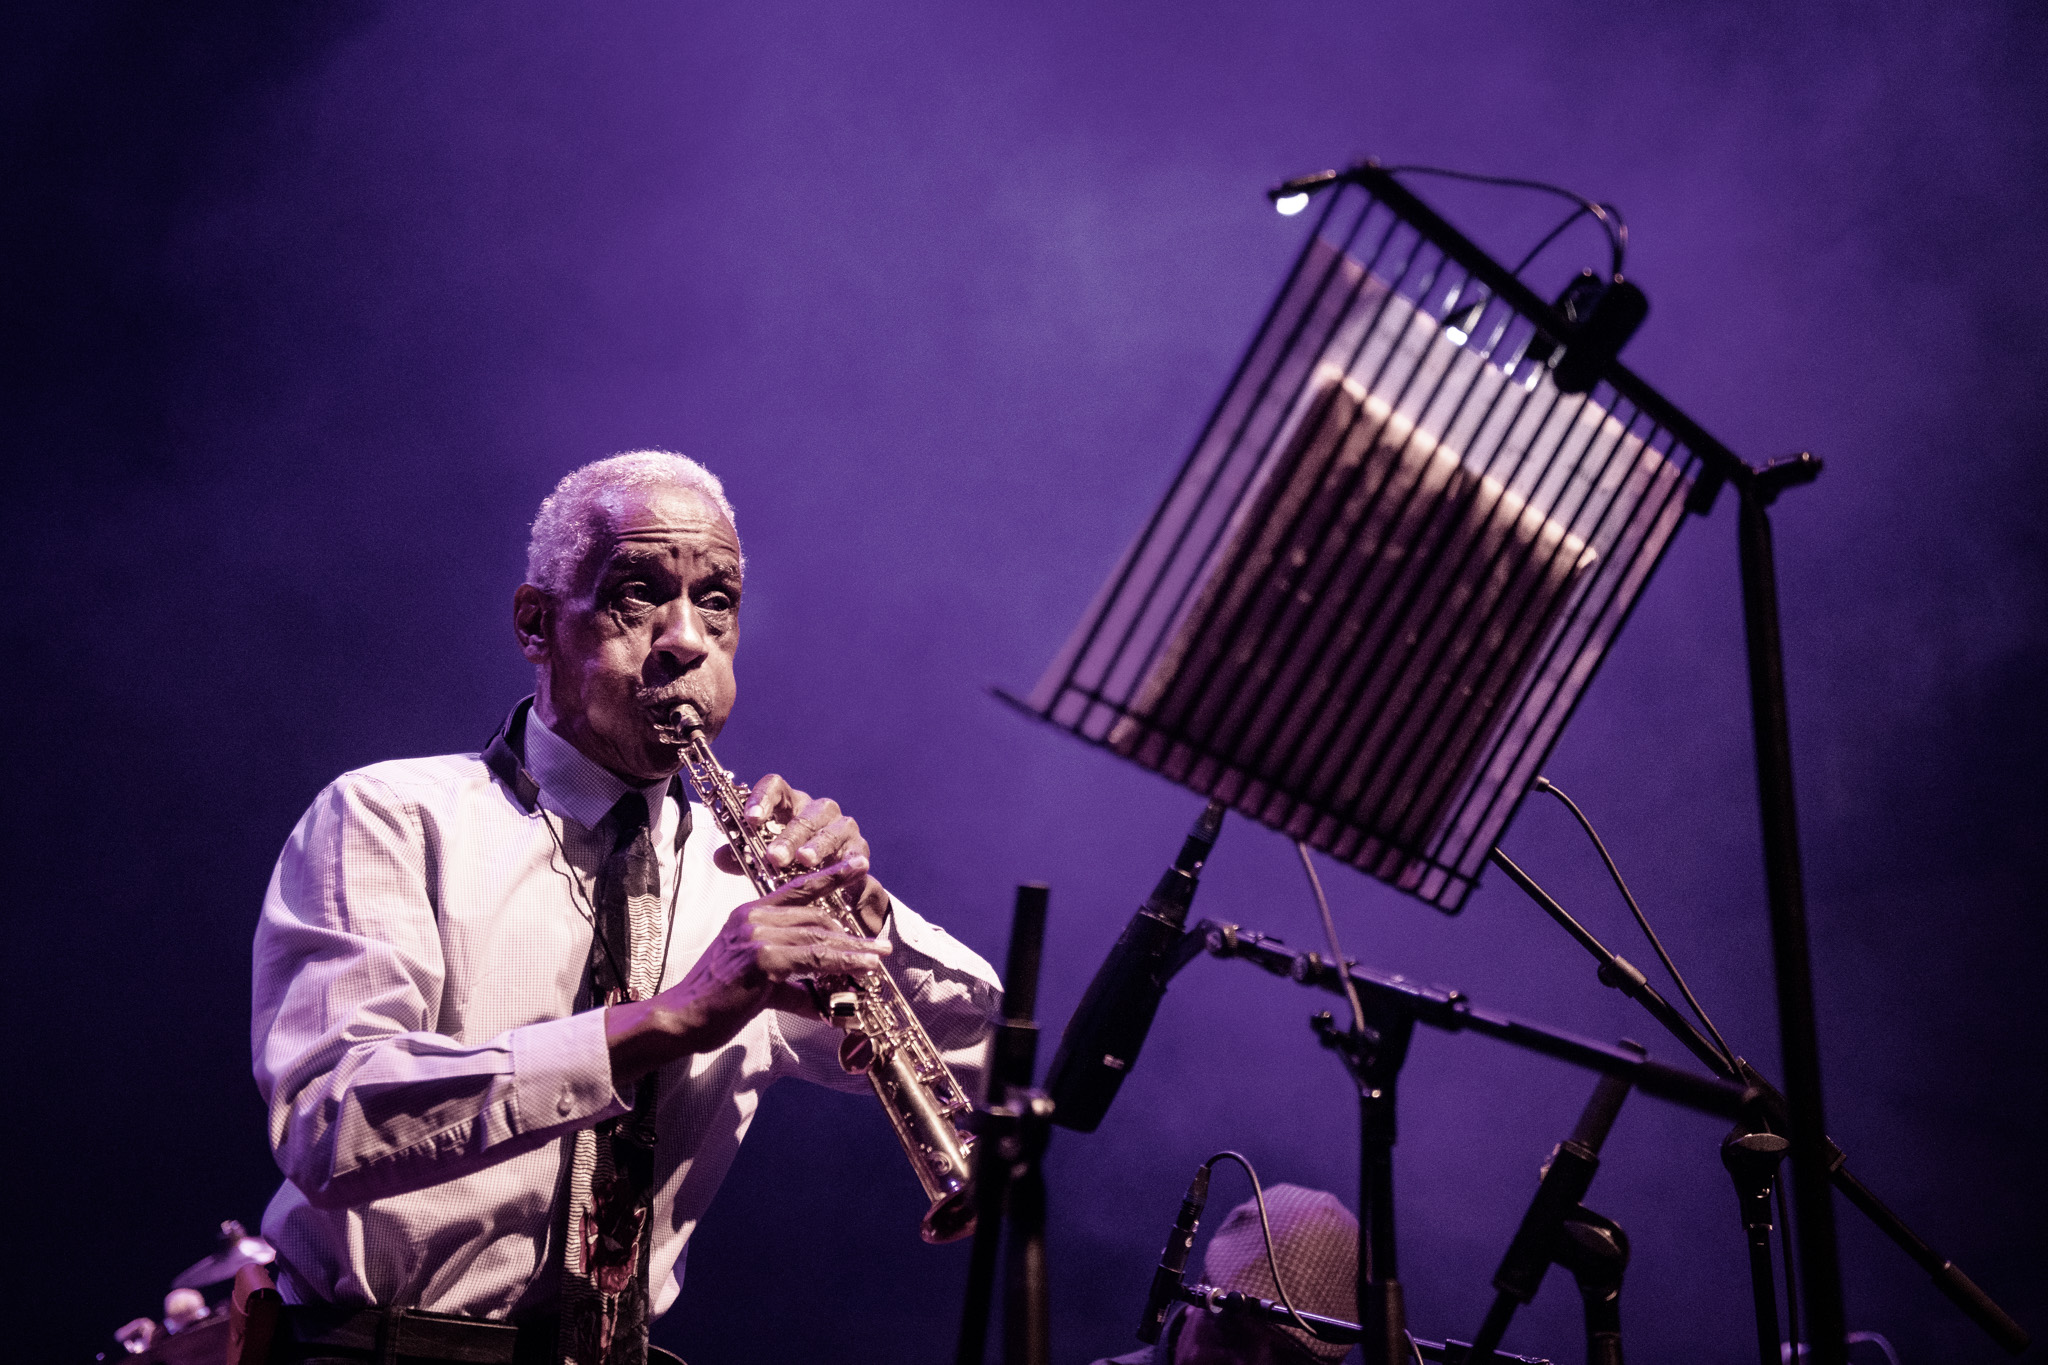 Listen to Art Ensemble of Chicago's full performance at LGW18, curated by Moor Mother